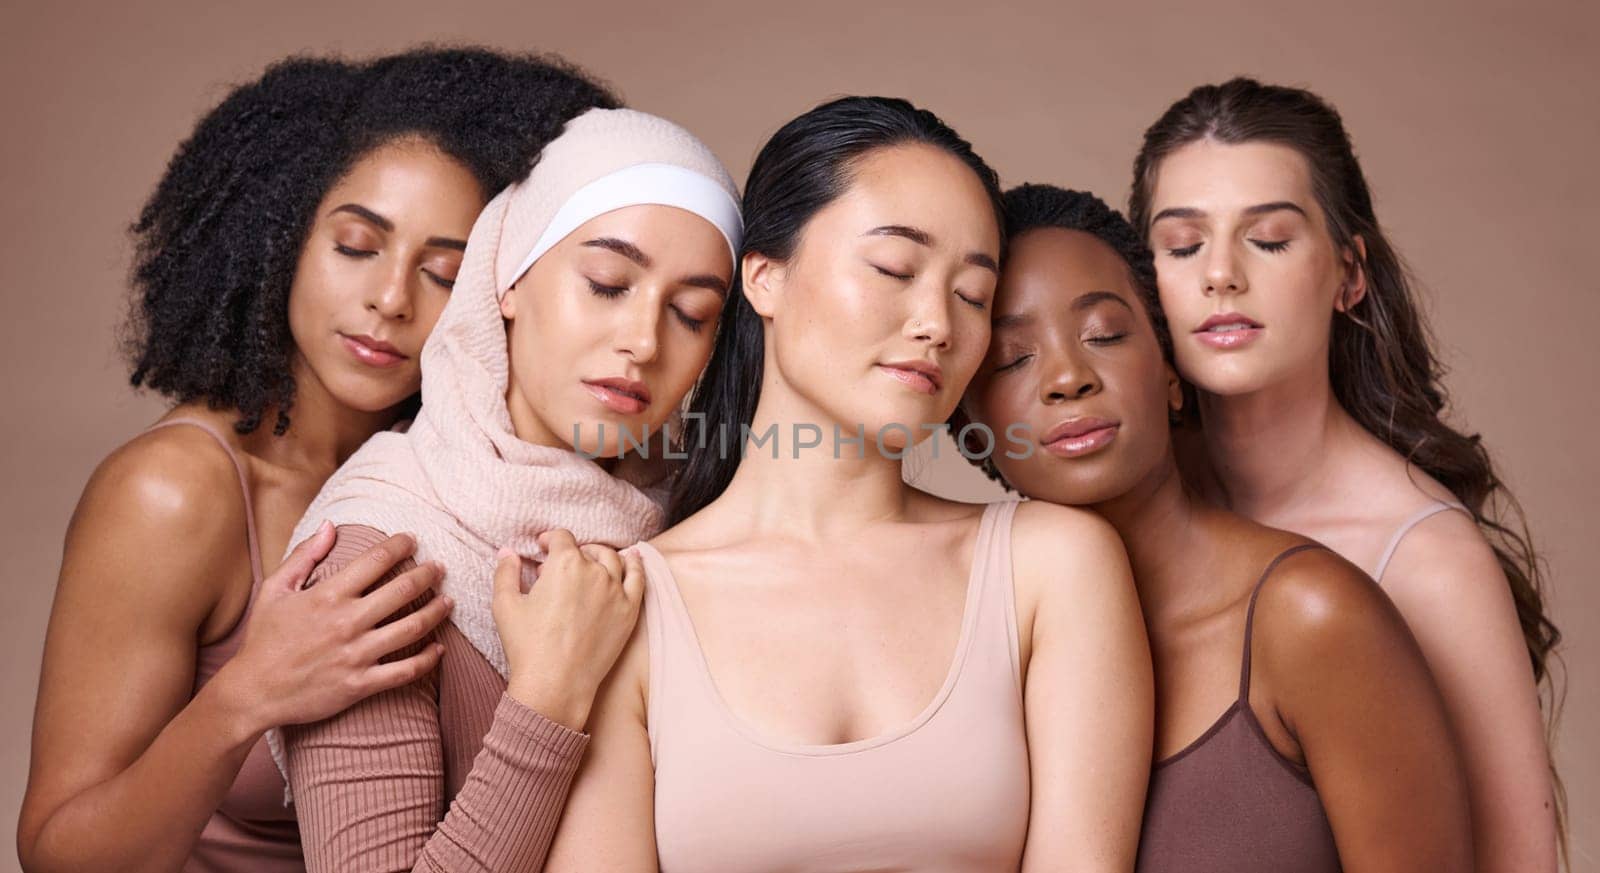 Women, diversity and relax global model group feeling calm about skincare, beauty and skin glow. Cosmetic, facial and dermatology wellness of models resting together showing cosmetics community by YuriArcurs